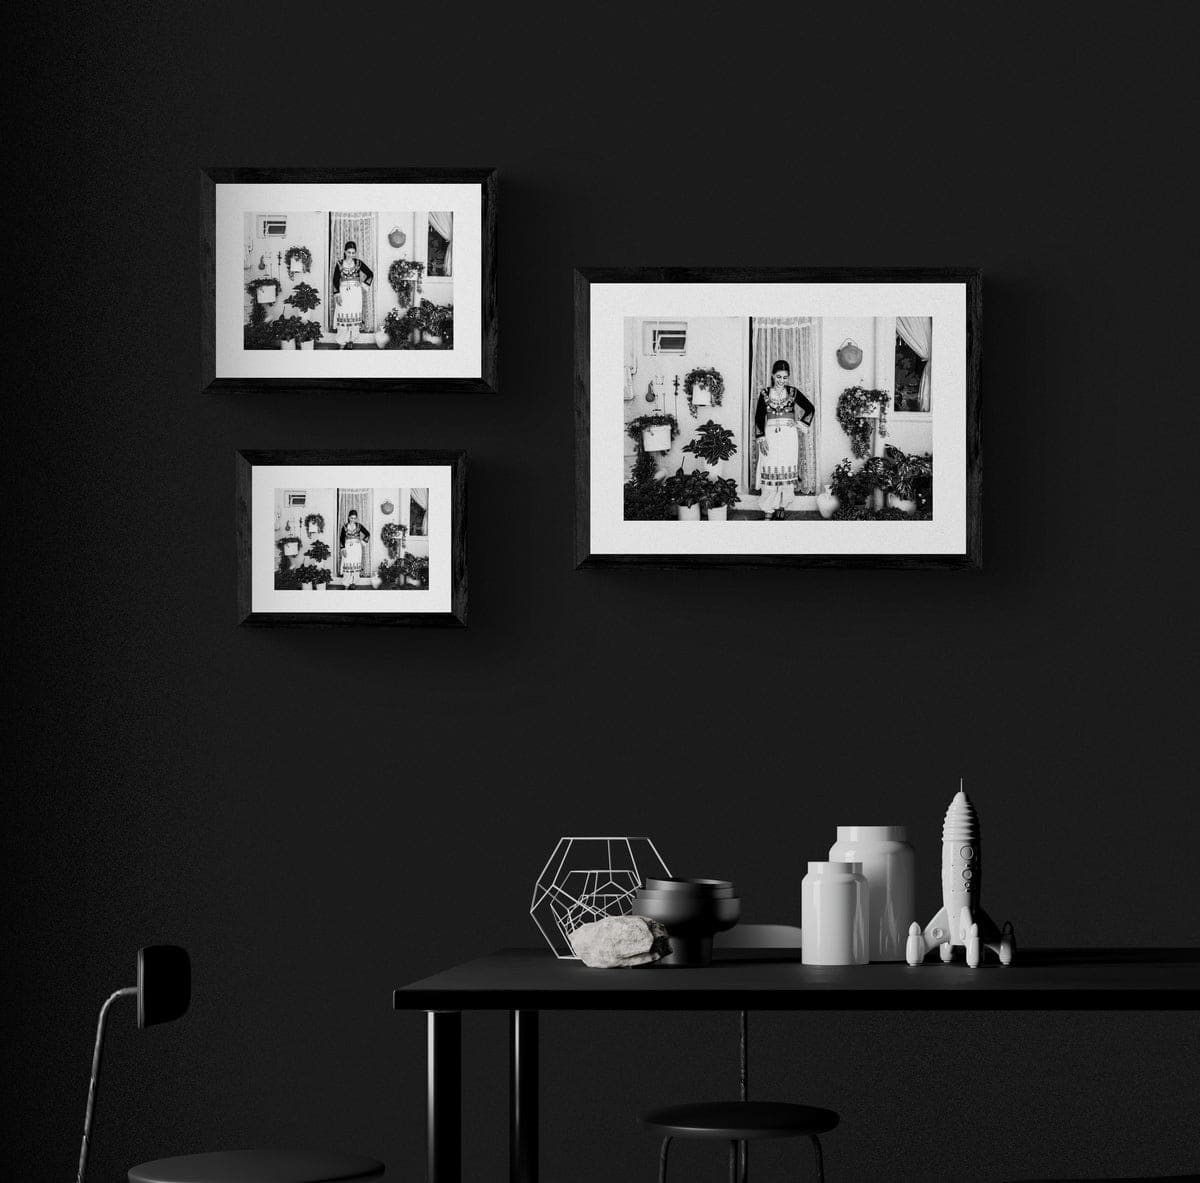 Black and White Photography Wall Art Greece | Garden Anogia Crete by George Tatakis - Black and White Photography Wall Art Greece | Garden Anogia Crete by George Tatakis - framing options